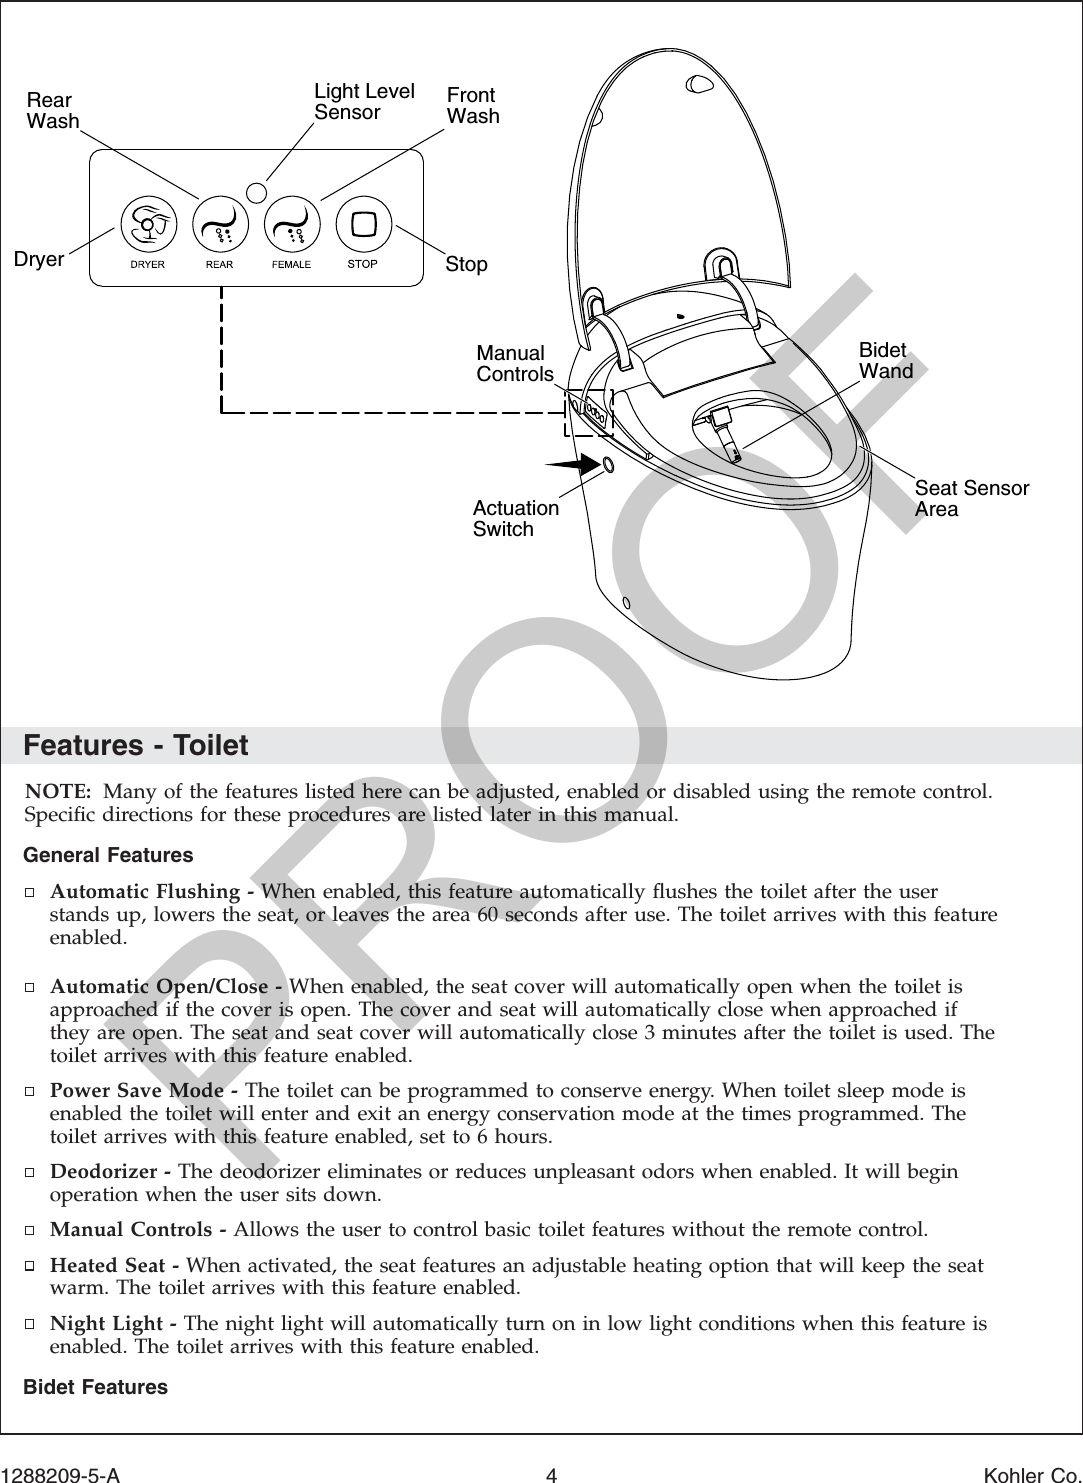 Features - ToiletNOTE: Many of the features listed here can be adjusted, enabled or disabled using the remote control.Speciﬁc directions for these procedures are listed later in this manual.General FeaturesAutomatic Flushing - When enabled, this feature automatically ﬂushes the toilet after the userstands up, lowers the seat, or leaves the area 60 seconds after use. The toilet arrives with this featureenabled.Automatic Open/Close - When enabled, the seat cover will automatically open when the toilet isapproached if the cover is open. The cover and seat will automatically close when approached ifthey are open. The seat and seat cover will automatically close 3 minutes after the toilet is used. Thetoilet arrives with this feature enabled.Power Save Mode - The toilet can be programmed to conserve energy. When toilet sleep mode isenabled the toilet will enter and exit an energy conservation mode at the times programmed. Thetoilet arrives with this feature enabled, set to 6 hours.Deodorizer - The deodorizer eliminates or reduces unpleasant odors when enabled. It will beginoperation when the user sits down.Manual Controls - Allows the user to control basic toilet features without the remote control.Heated Seat - When activated, the seat features an adjustable heating option that will keep the seatwarm. The toilet arrives with this feature enabled.Night Light - The night light will automatically turn on in low light conditions when this feature isenabled. The toilet arrives with this feature enabled.Bidet FeaturesStopFront WashRear WashDryerSeat Sensor AreaBidet WandManualControlsActuationSwitch Light Level Sensor1288209-5-A 4 Kohler Co.PROOF